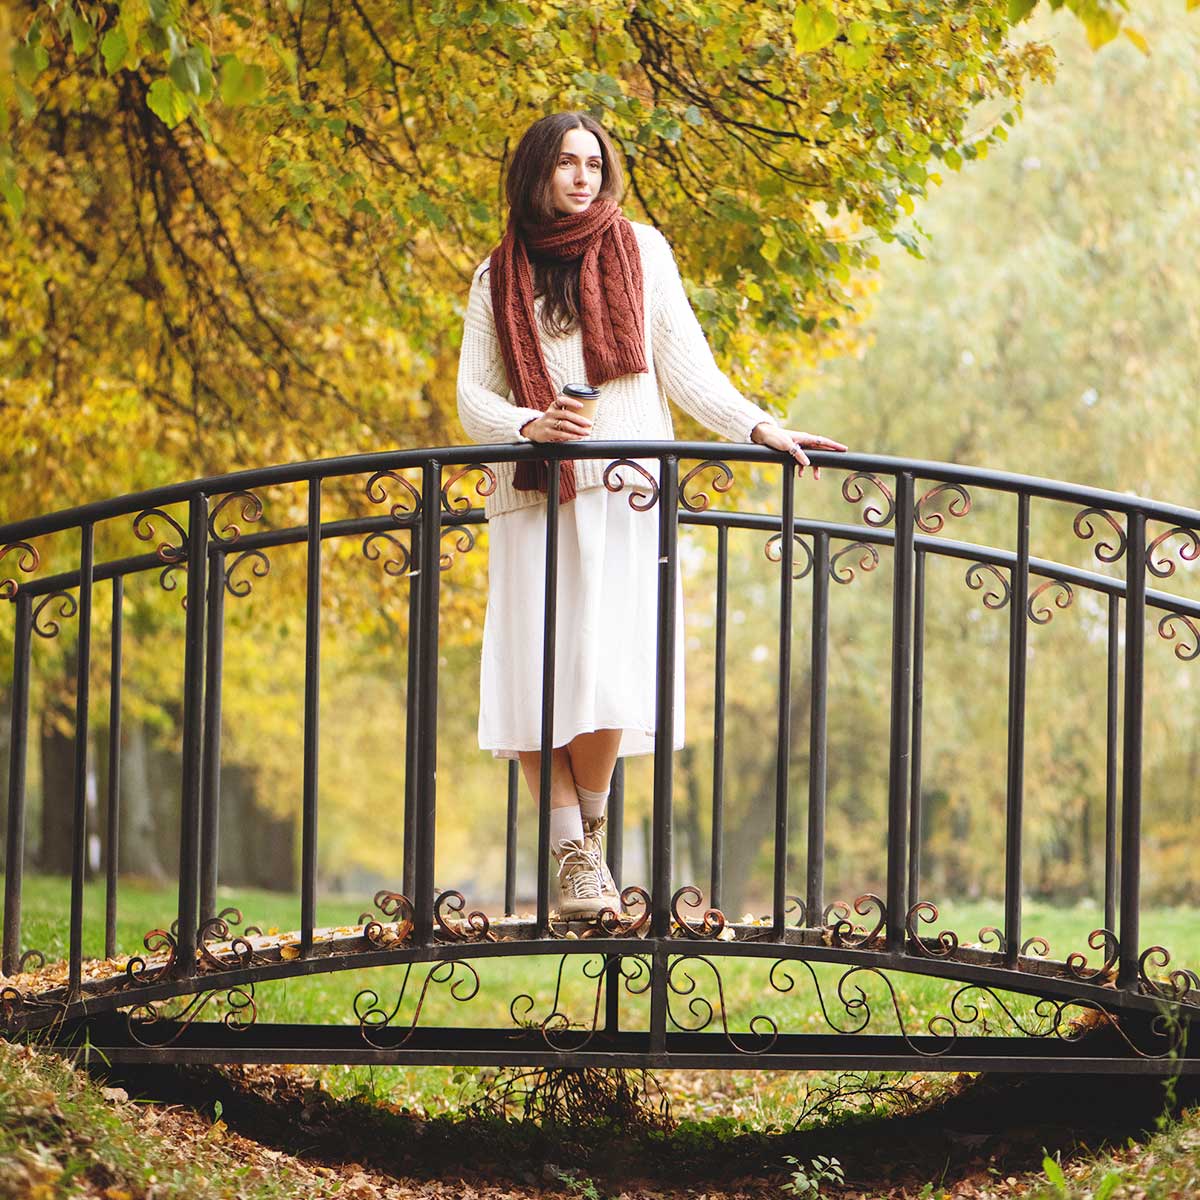 Woman wearing skirt and cozy sweater standing on small metal bridge on an autumn day.